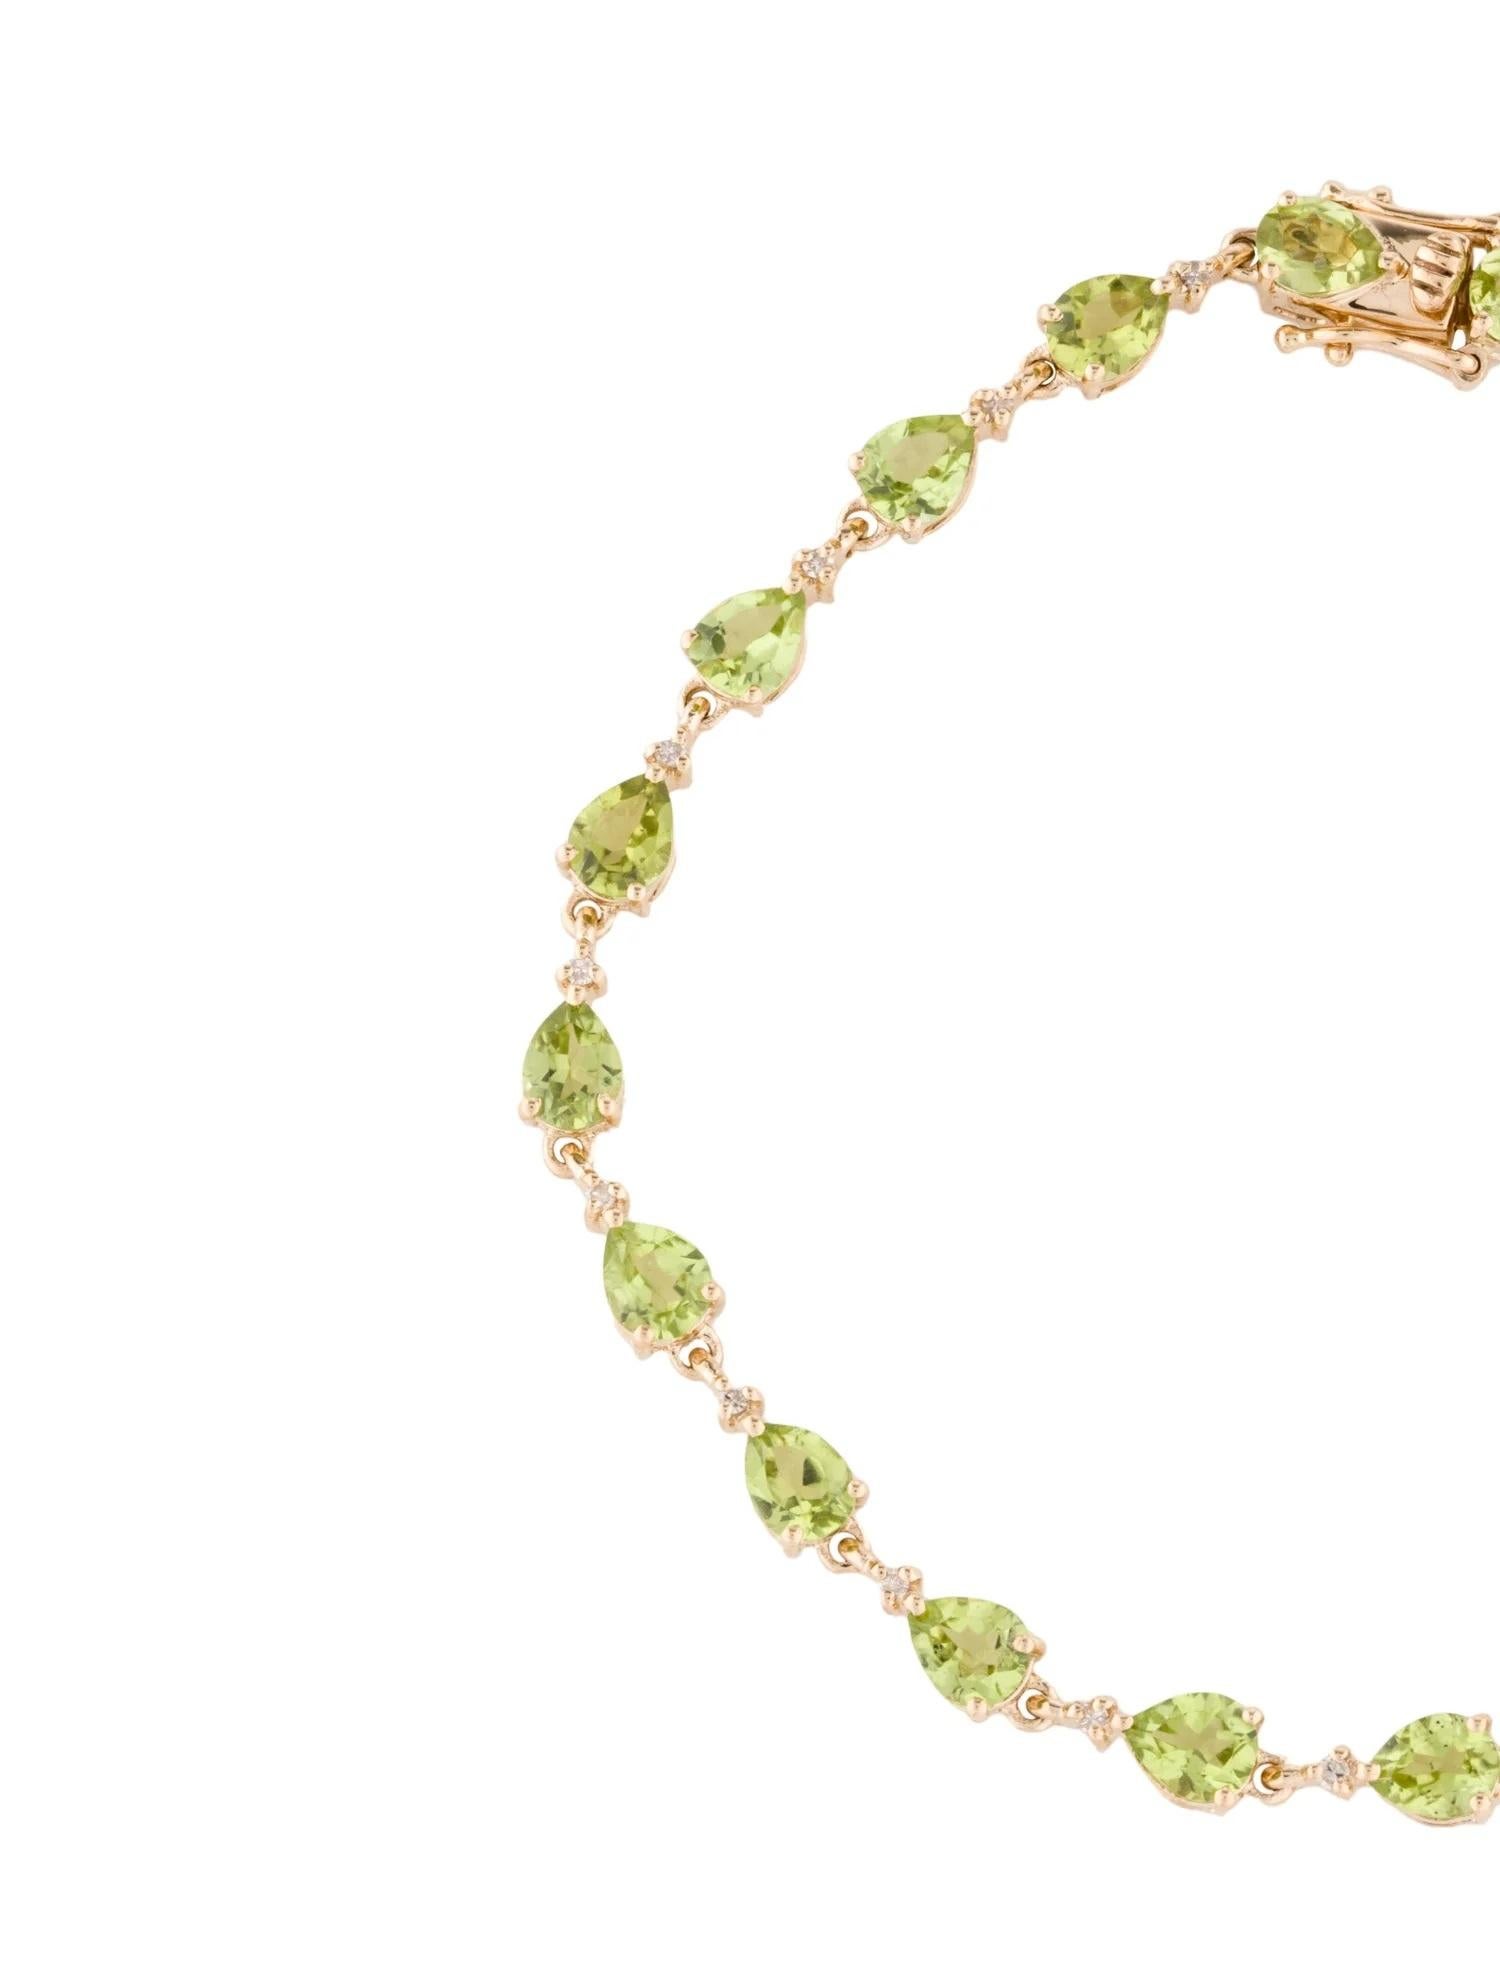 Elevate your jewelry collection with this exquisite 14K yellow gold link bracelet featuring stunning pear modified brilliant peridot gemstones. With a total carat weight of 6.82, the vibrant green peridots are beautifully complemented by sparkling